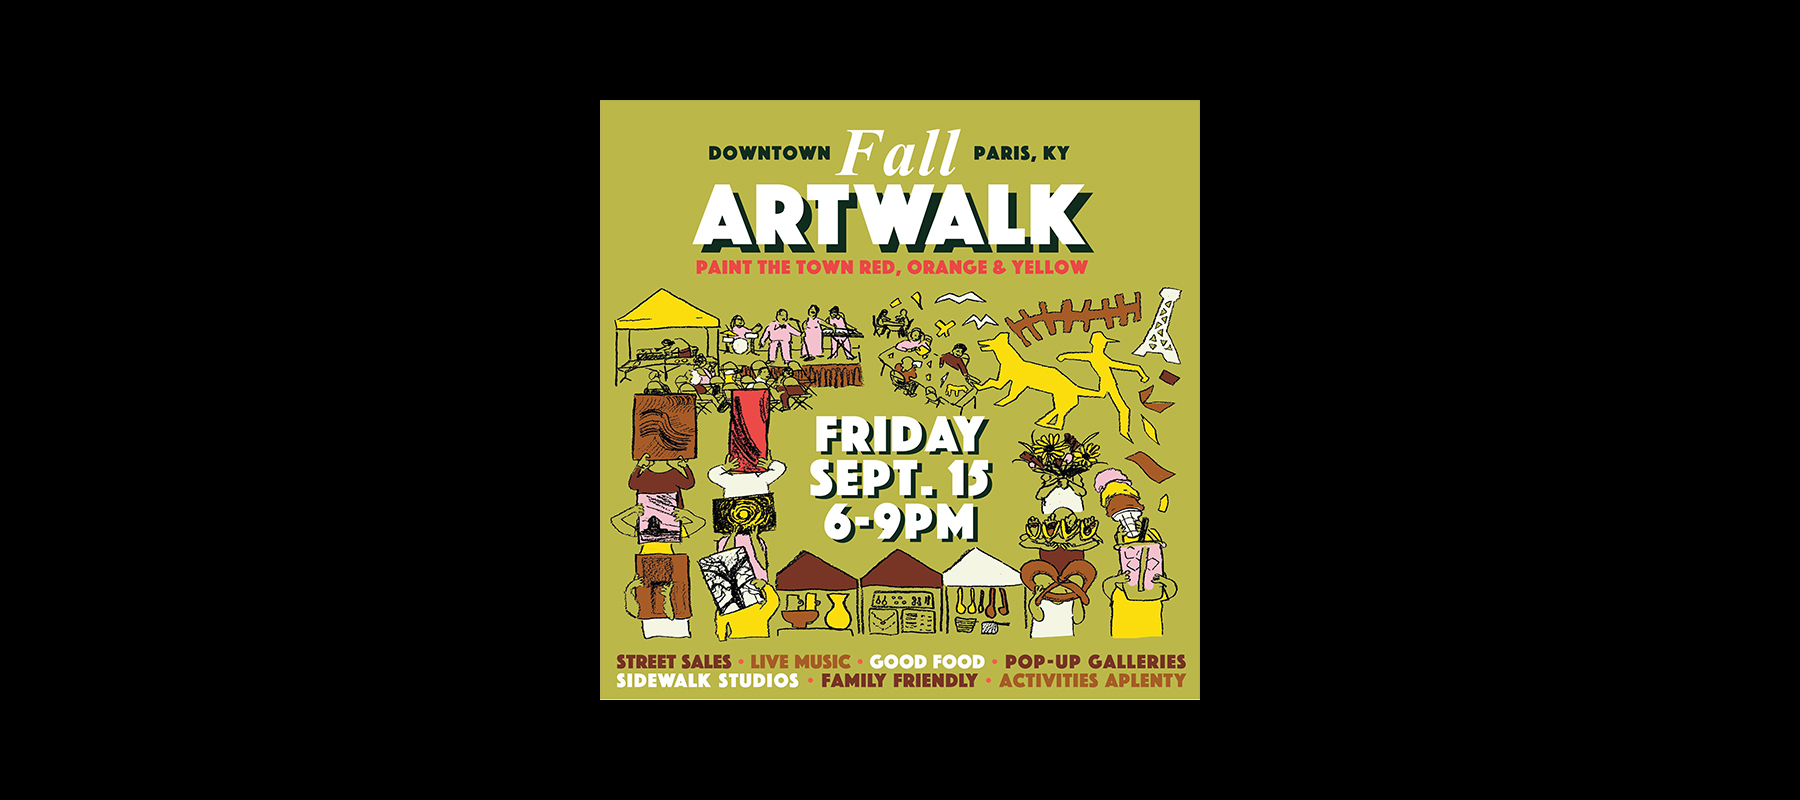 Downtown Paris Ky Fall ArtWalk: Paint the town red, orange, and yellow. Friday, September 15th 6 p.m. to 9 p.m. Street sales, live music, good food, pop-up galleries, sidewalk studios, family friendly, activities aplenty